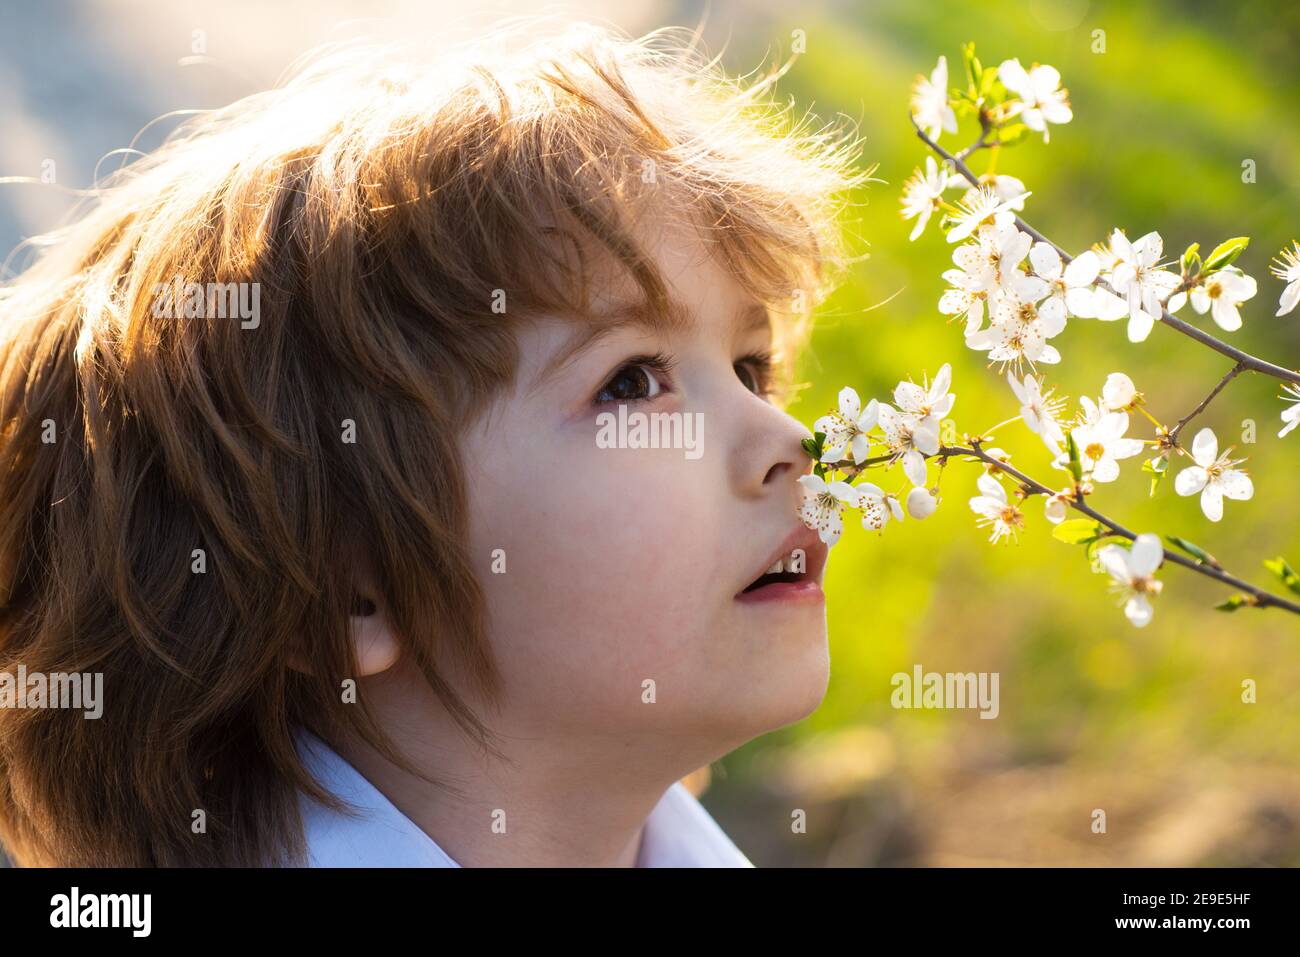 Happy childhood. Spring kid allergie sniffs blooming tree. Cute child in blossom garden. Stock Photo